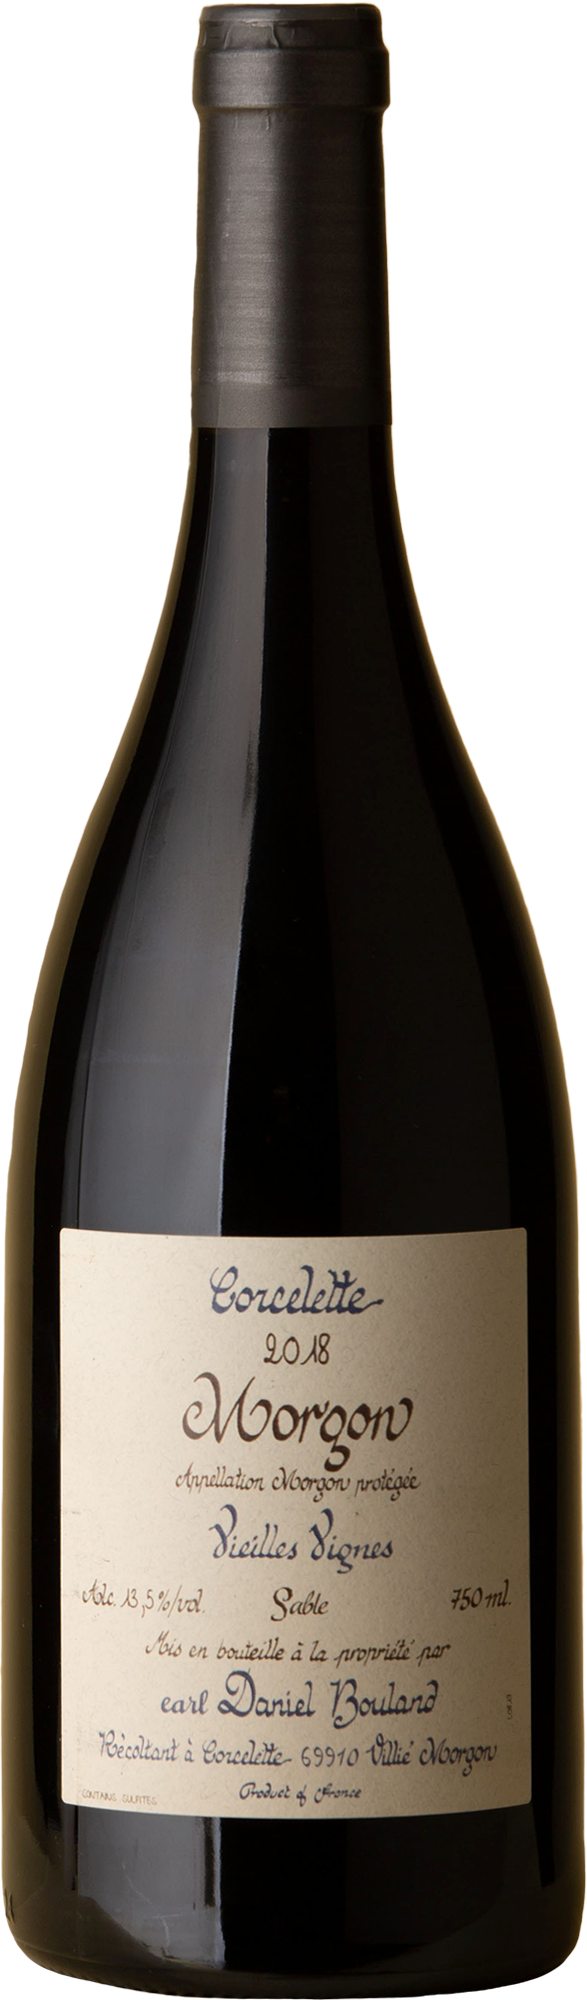 Daniel Bouland 2018 - Corcelette Morgon Gamay 2018 Red Wine